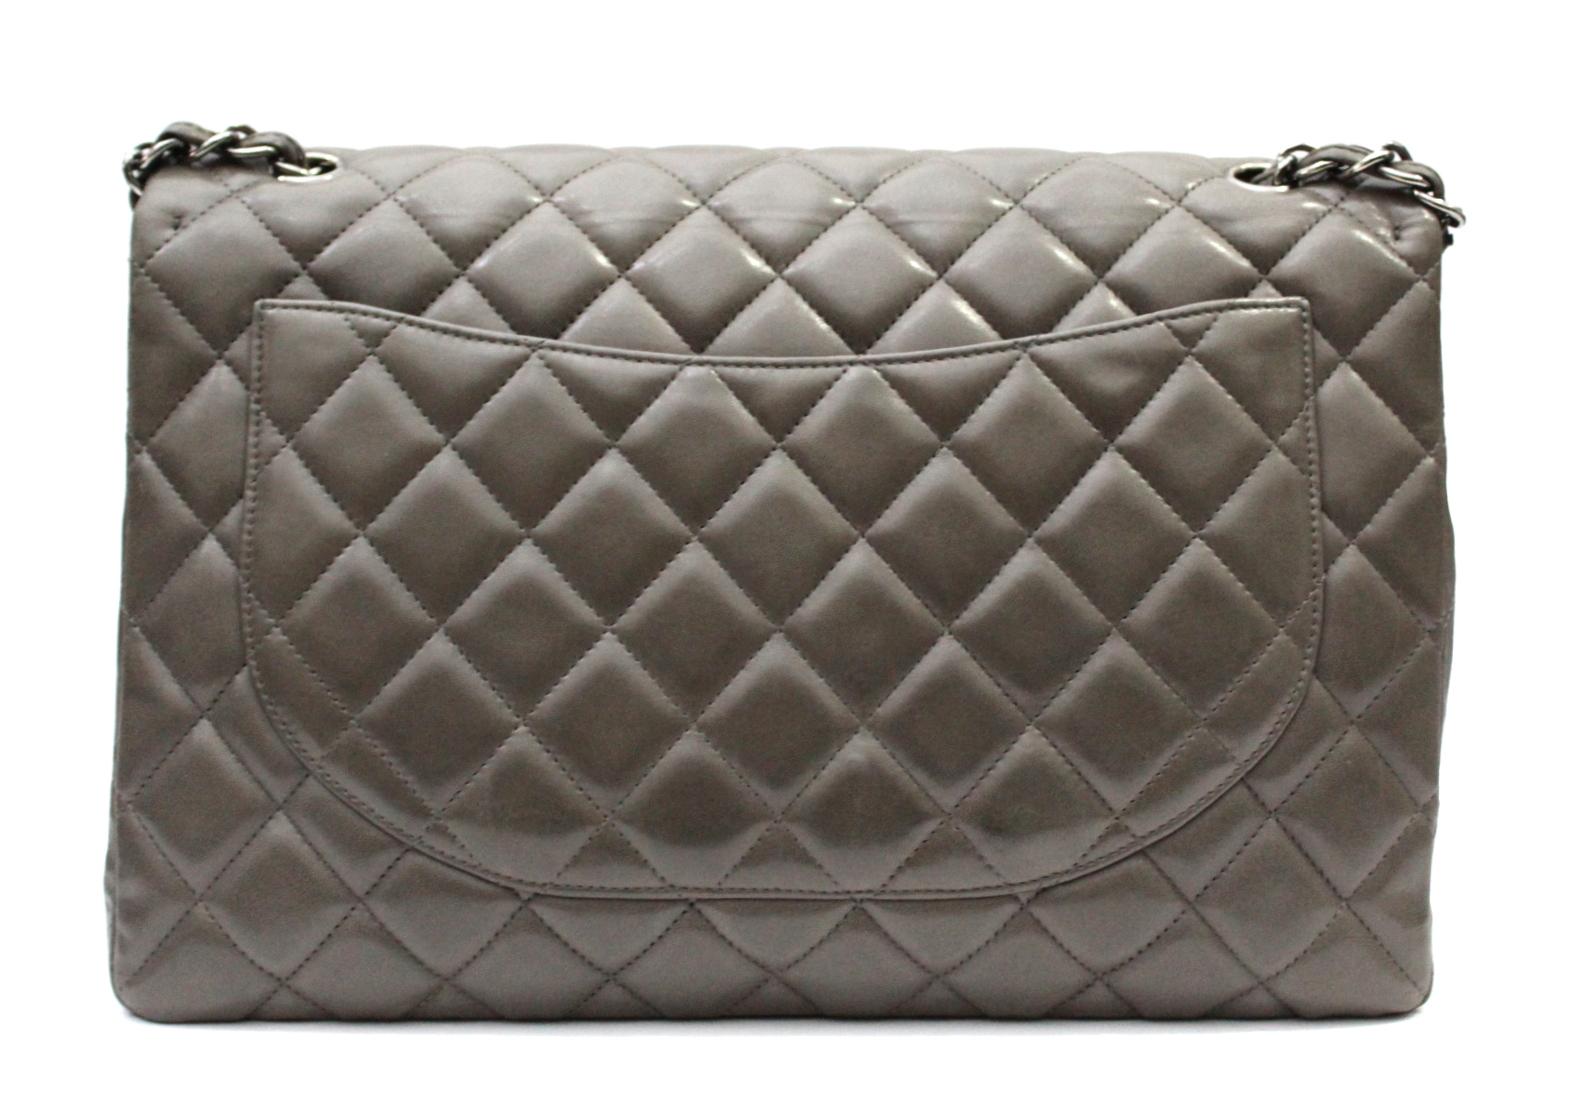 The Chanel Maxi Jumbo in dove-gray quilted smooth leather, is perhaps the most sought-after bag in the classic Chanel collection, which continuously increases in value. This bag features a CC closure with silver padlock. The versatile chain and